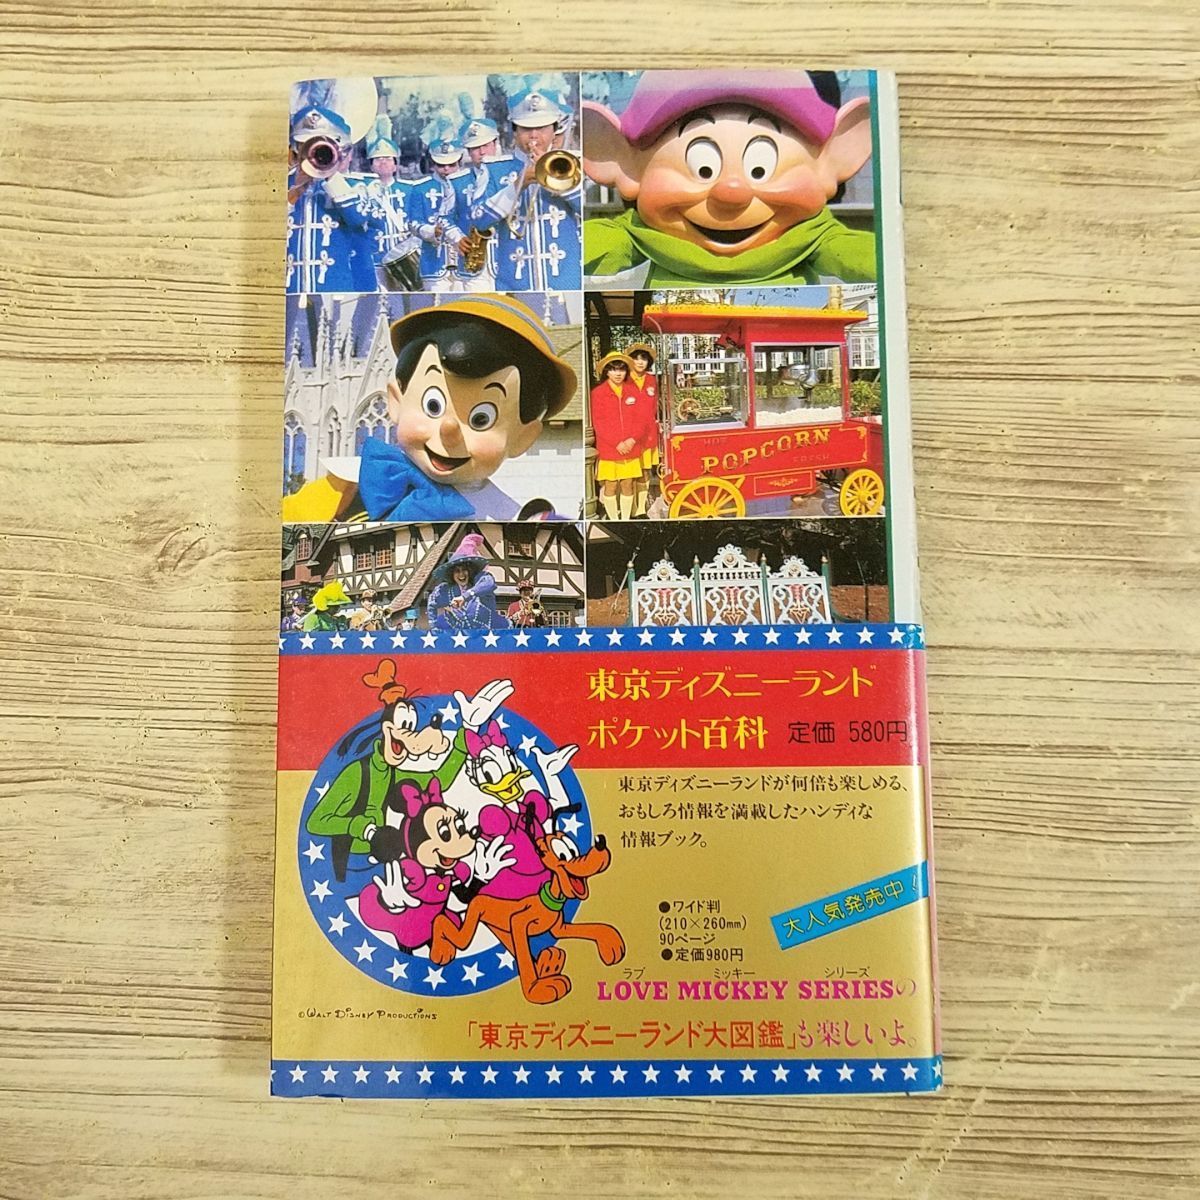  tourist guide [ Tour .100% comfort information full load Tokyo Disney Land pocket various subjects ( Showa era 58 year 5 month no. 2.)( obi * map attaching )] open at first. TDL